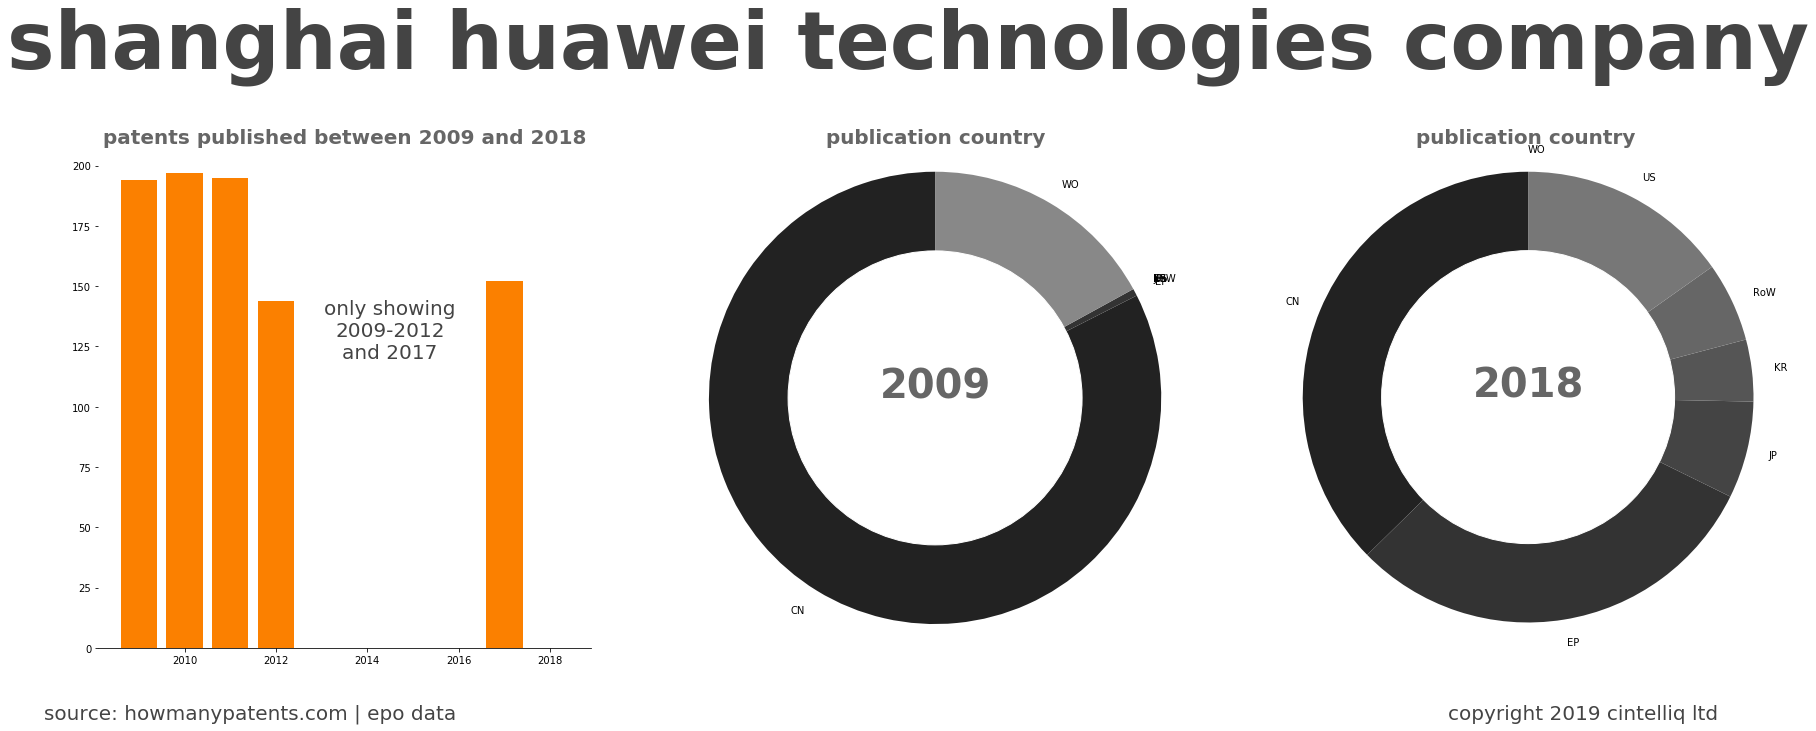 summary of patents for Shanghai Huawei Technologies Company